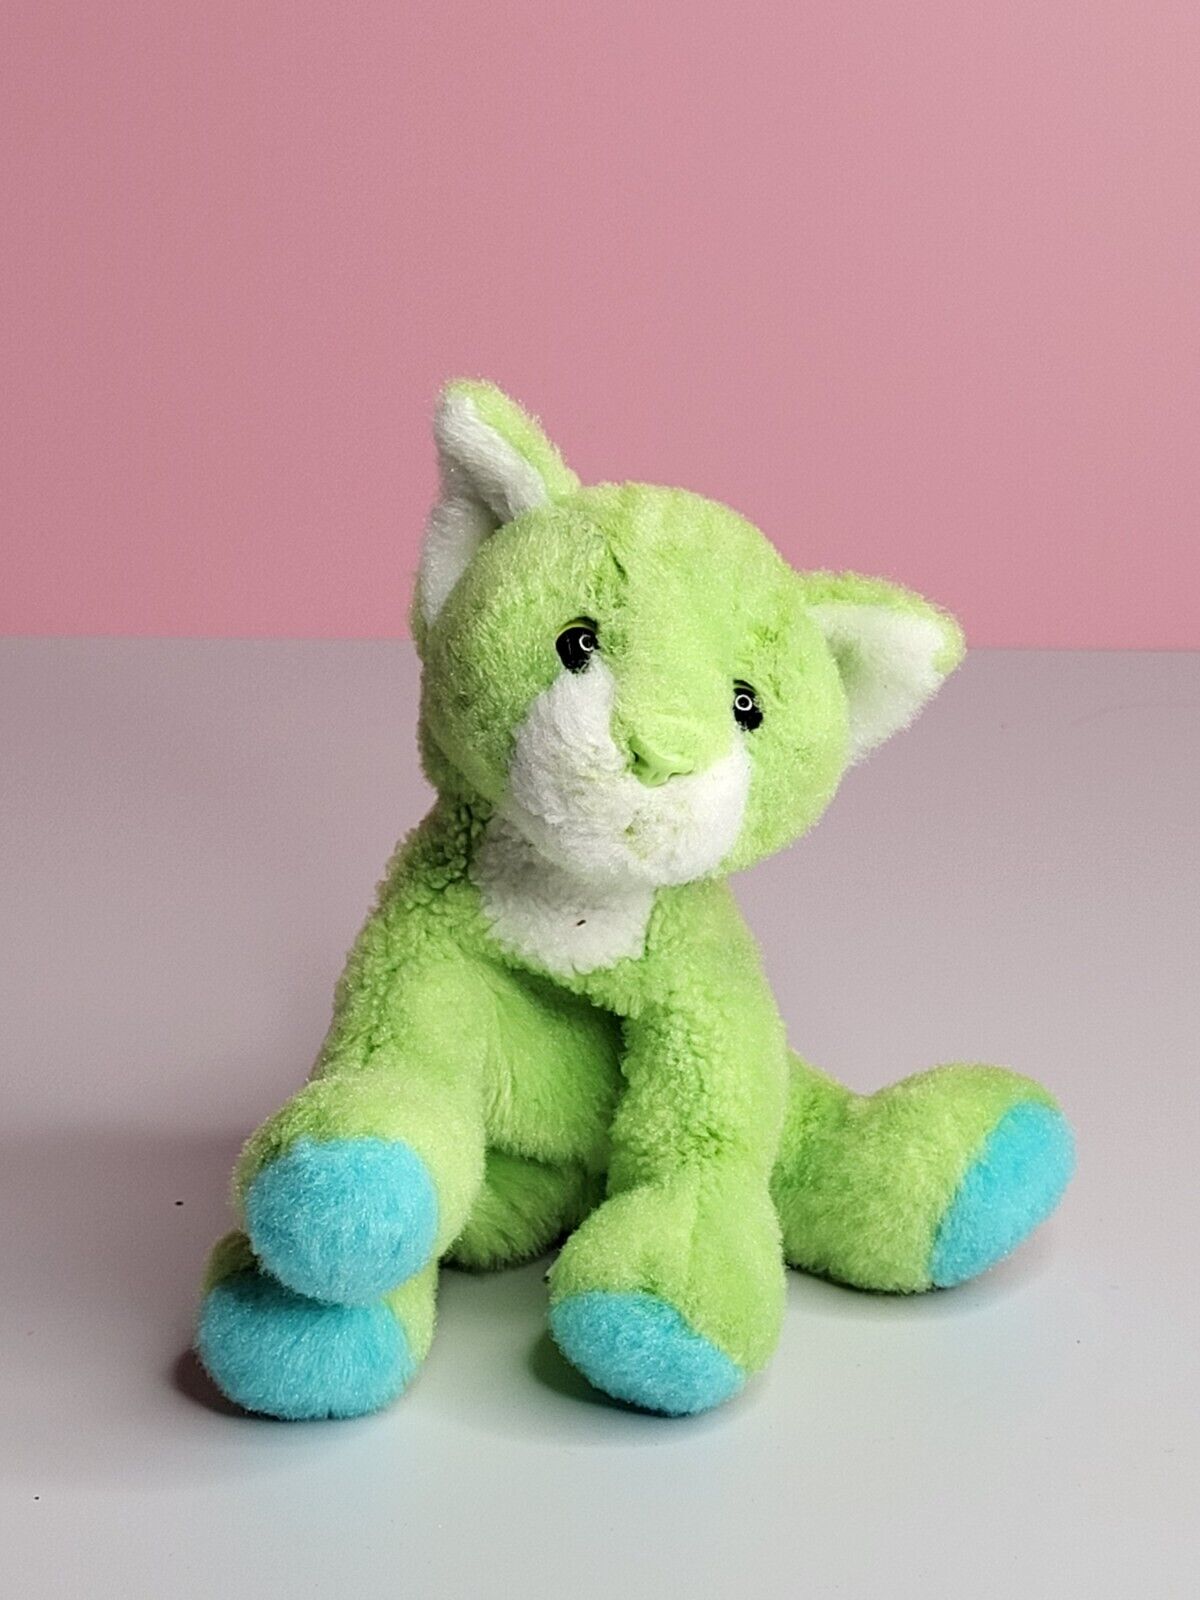 Russ Yomiko Dreamers Green Tabby Cat With Blue Paws Beanie Plus #12214 5"